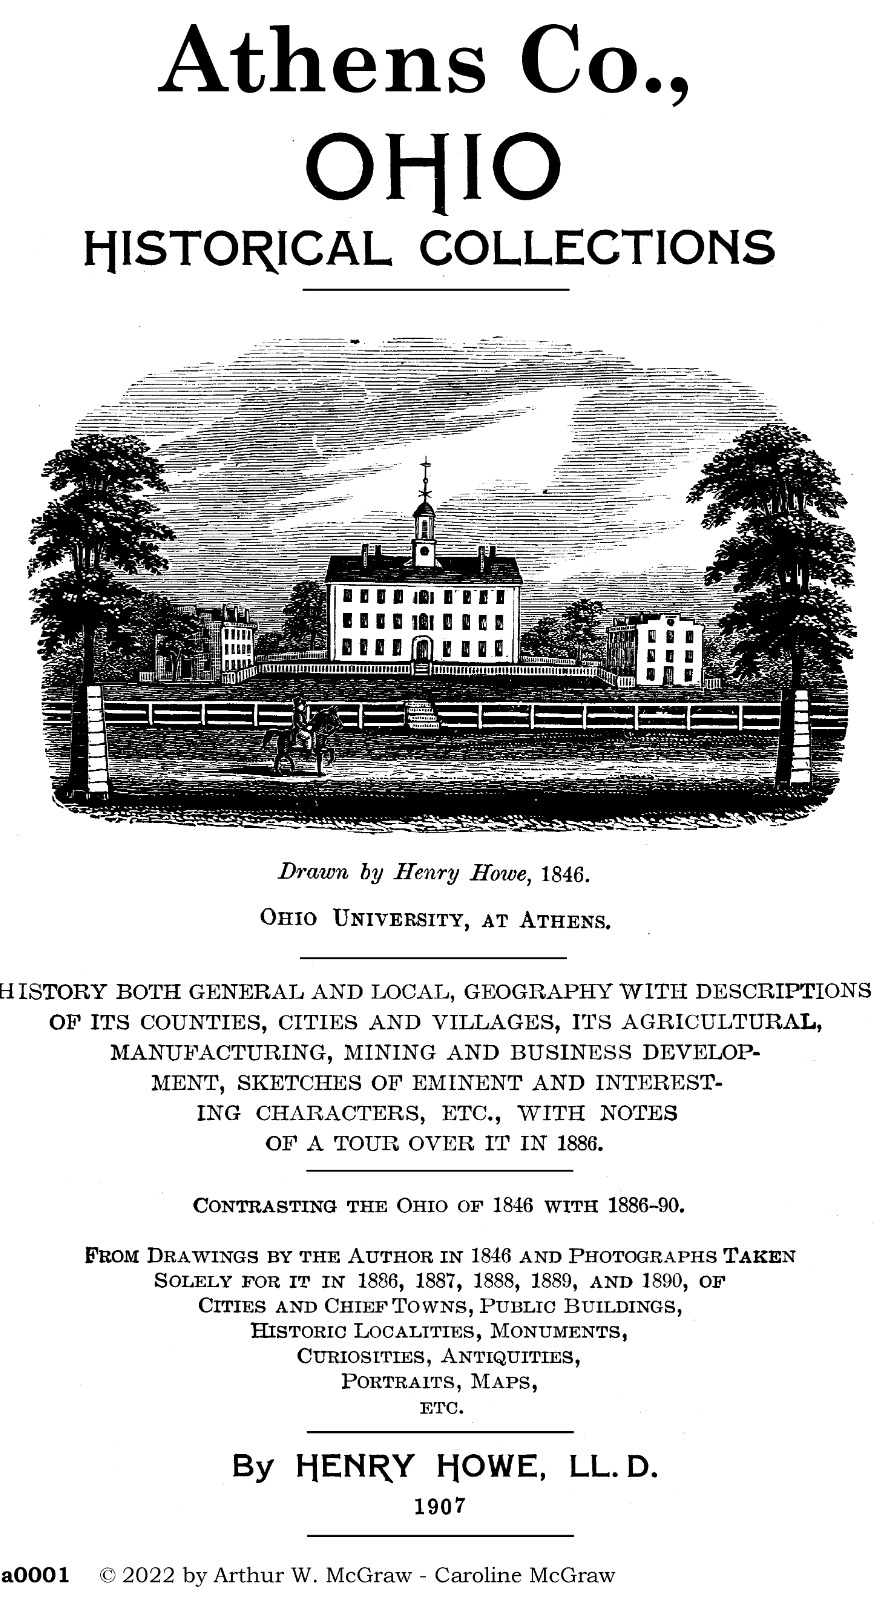 Athens Co., Ohio Historical Collections 1907 by Henry Howe - pdf